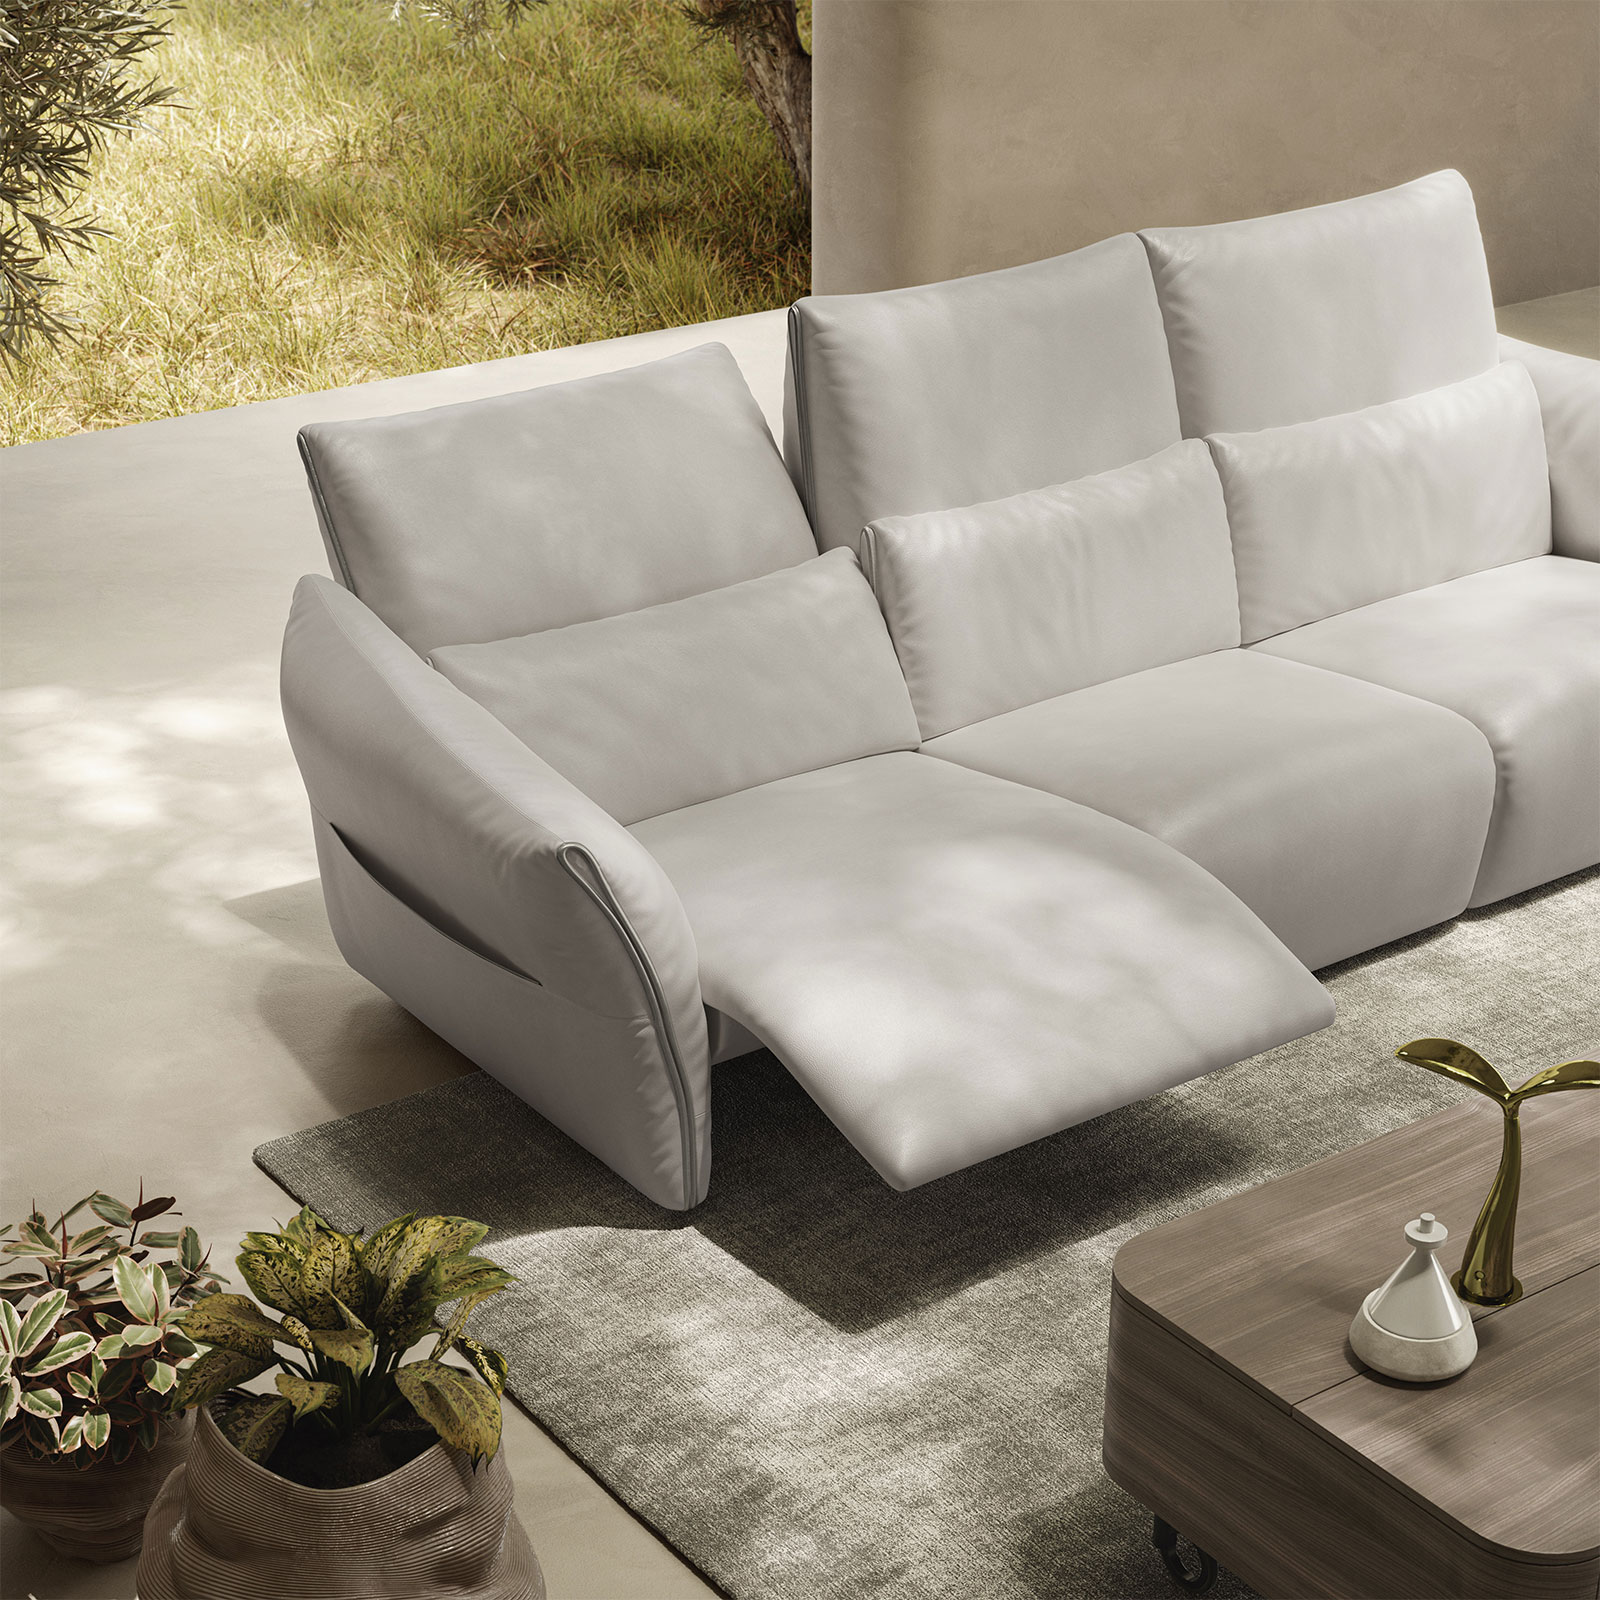 Natuzzi editorial - Our way to improve your quality of life